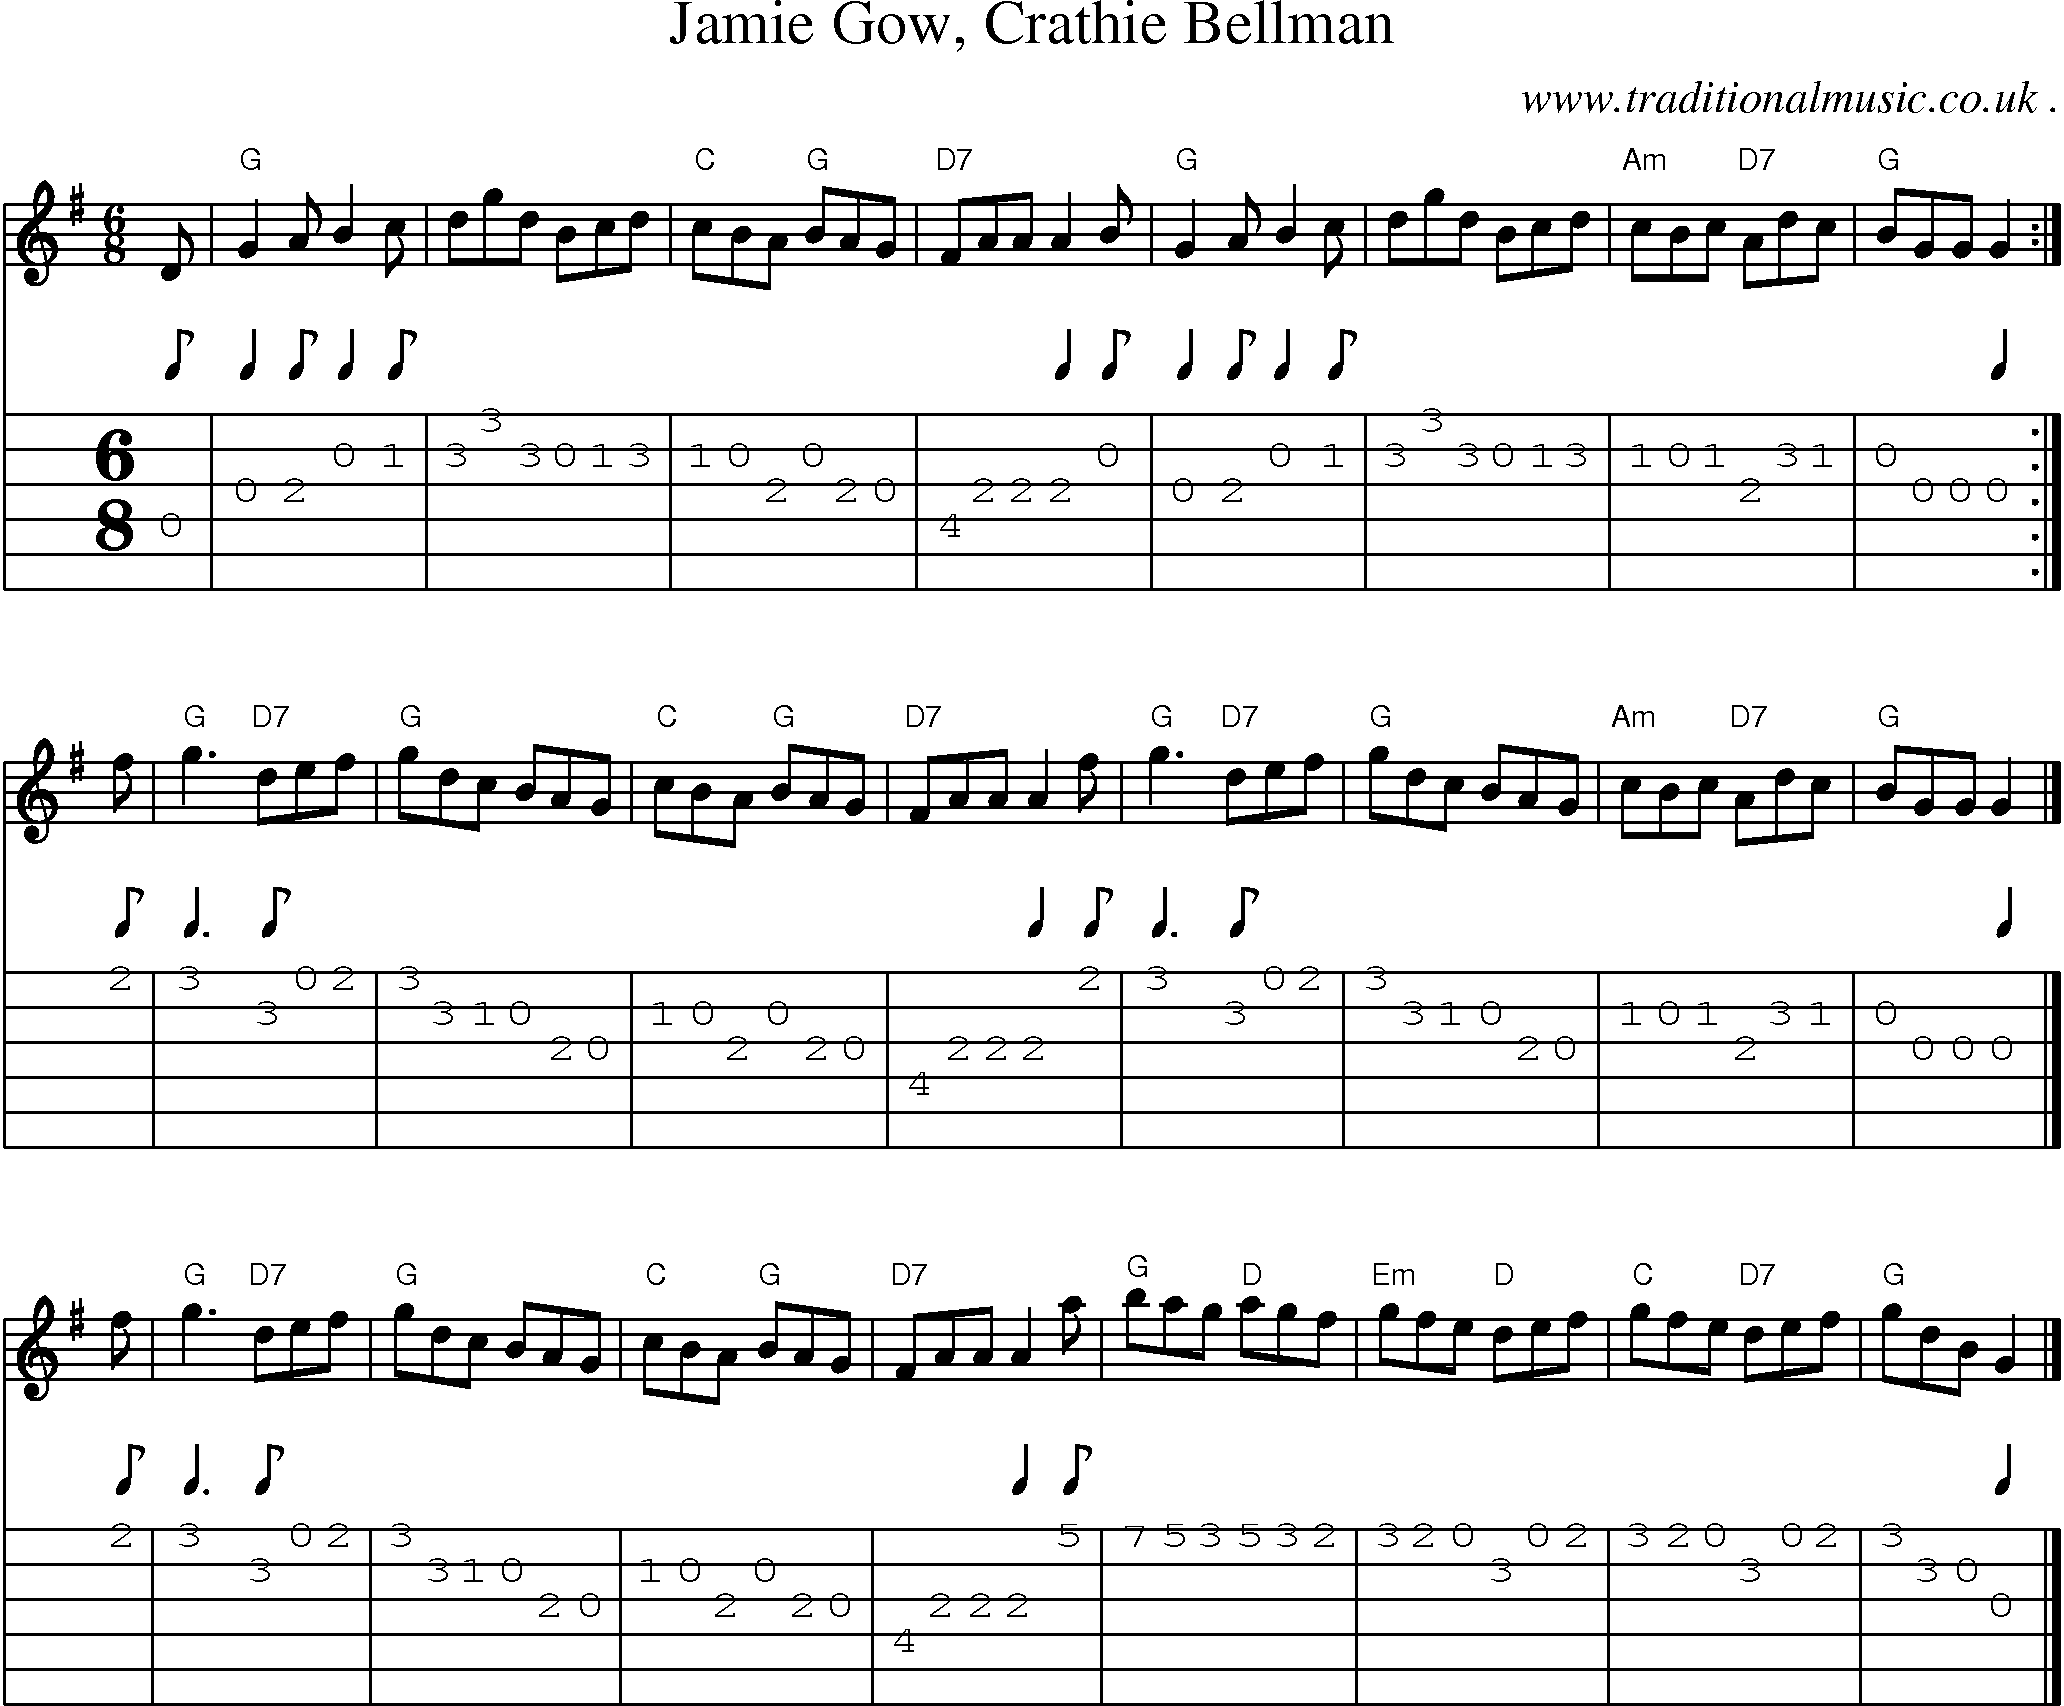 Sheet-music  score, Chords and Guitar Tabs for Jamie Gow Crathie Bellman